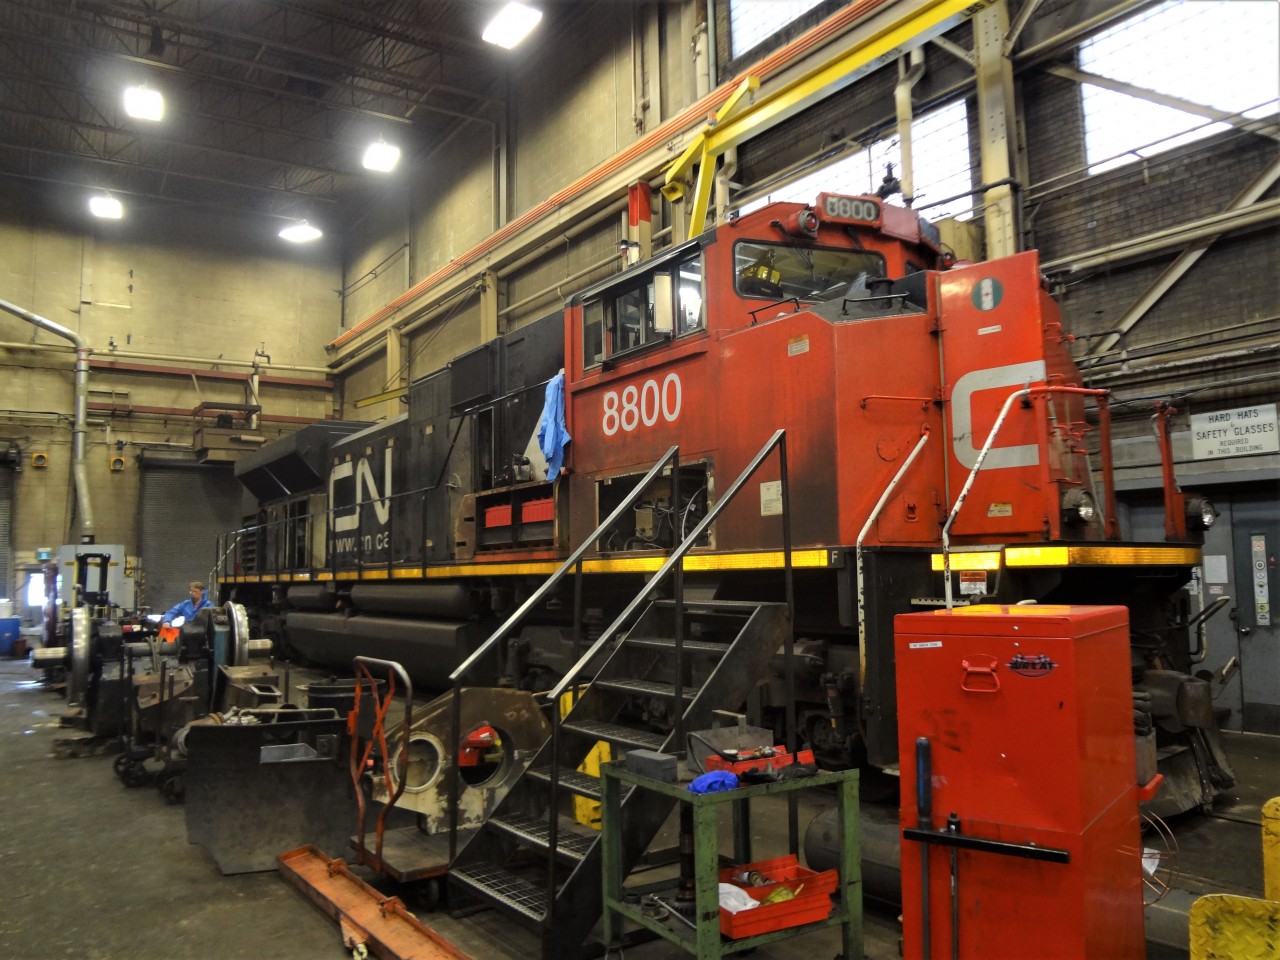 With numerous doors and hatches open or removed, it appears CN 8800 is in for some serious maintenance and or repairs at the ONR diesel shop in North Bay, ON.